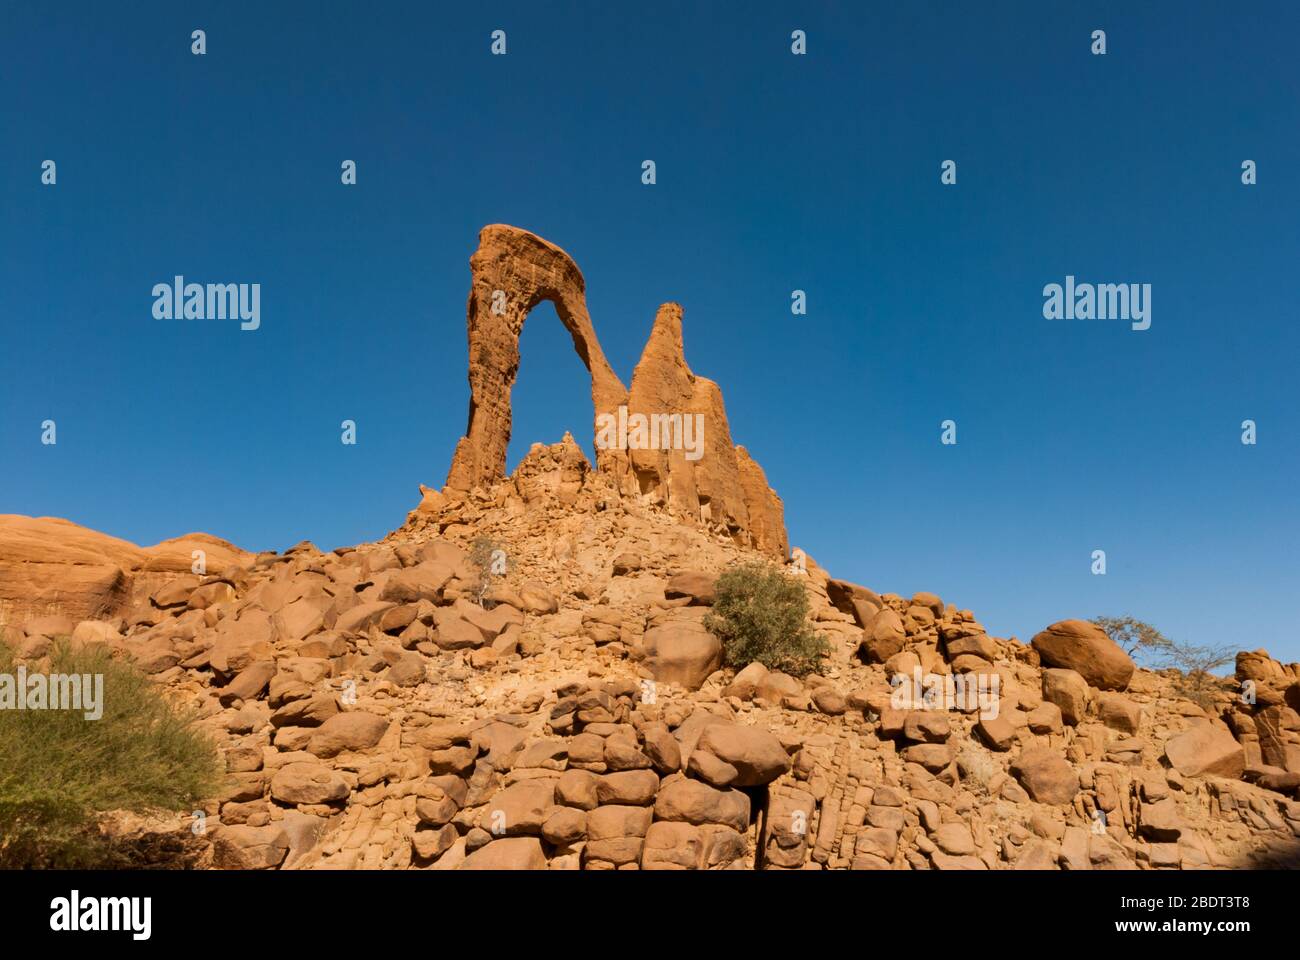 Abstract rocks formation in lyre shape at plateau Ennedi, in Sahara desert, Chad, Adrica Stock Photo